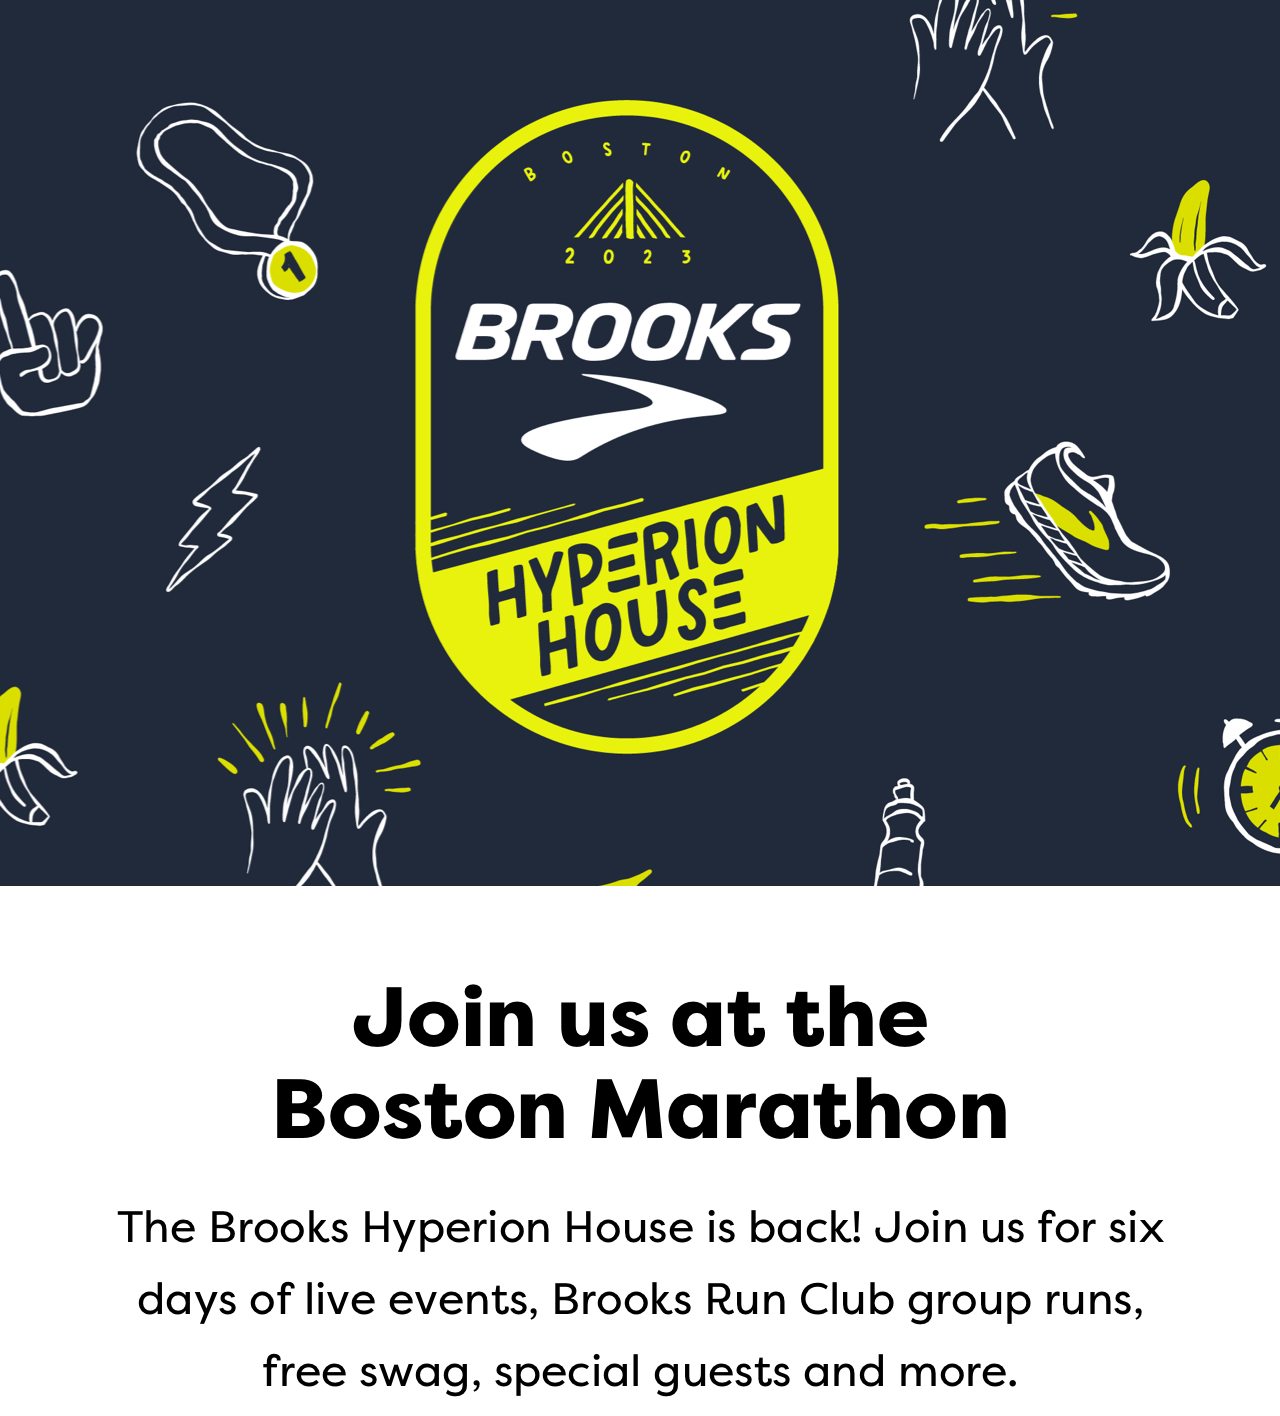 BOSTON 2023 - Brooks - Hyperion House | Join us at the Boston Marathon - The Brooks Hyperion House is back! Join us for six days of live events, Brooks Run Club group runs, free swag, special guests, and more.